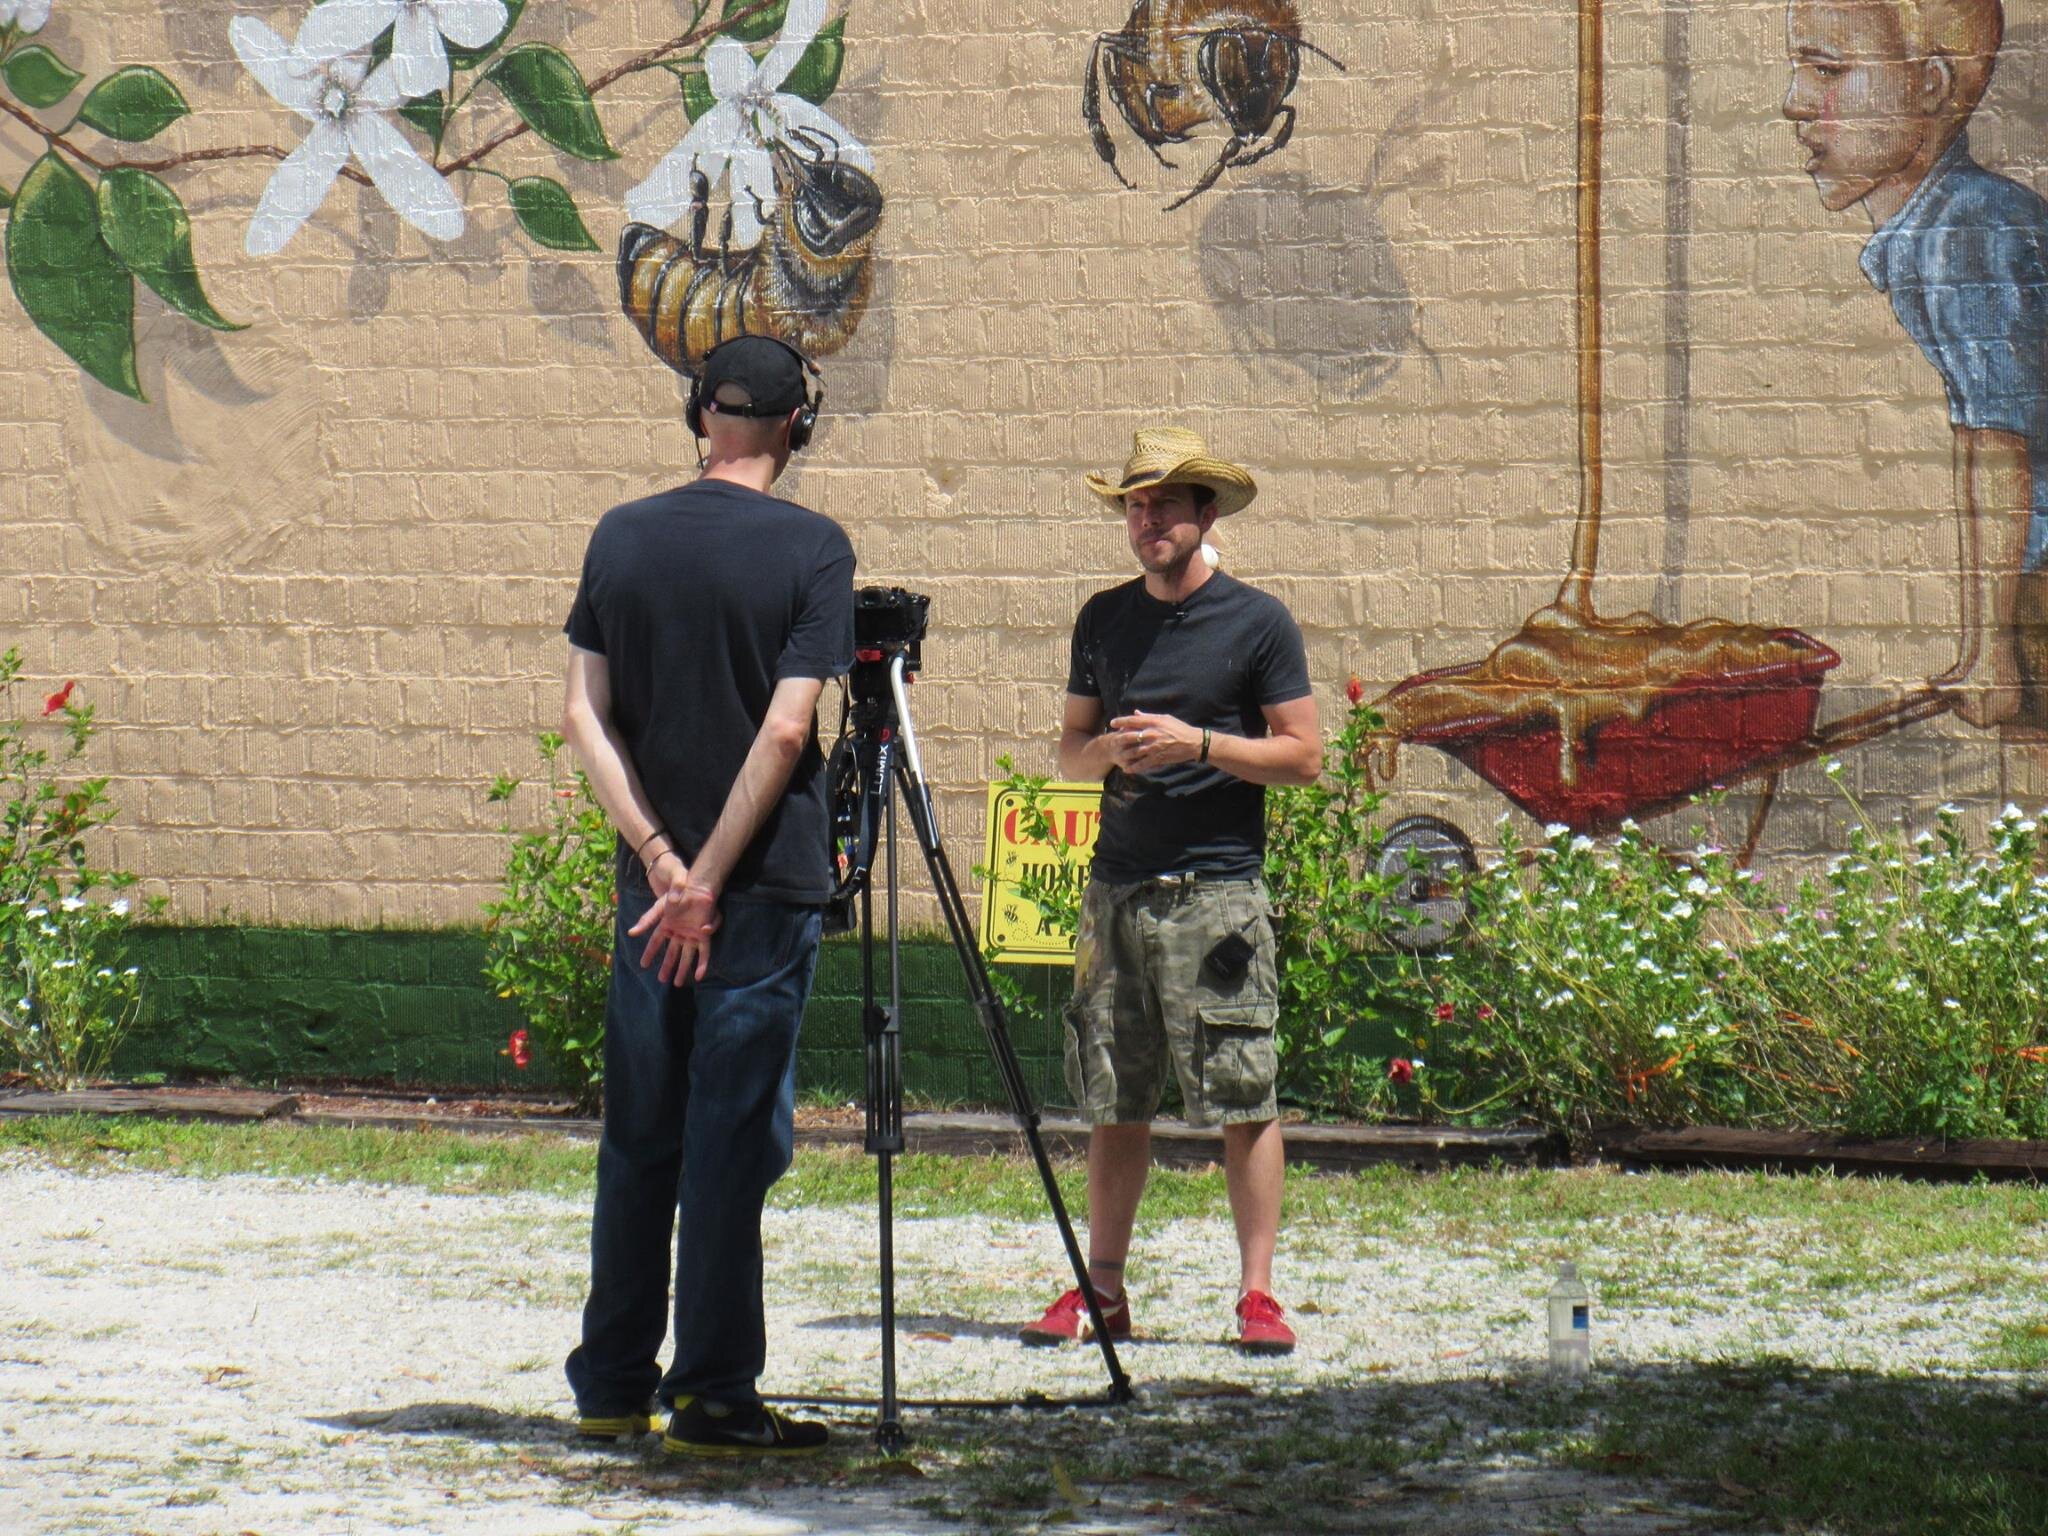 Matt Willey preparing to be photographed in front of the completed mural